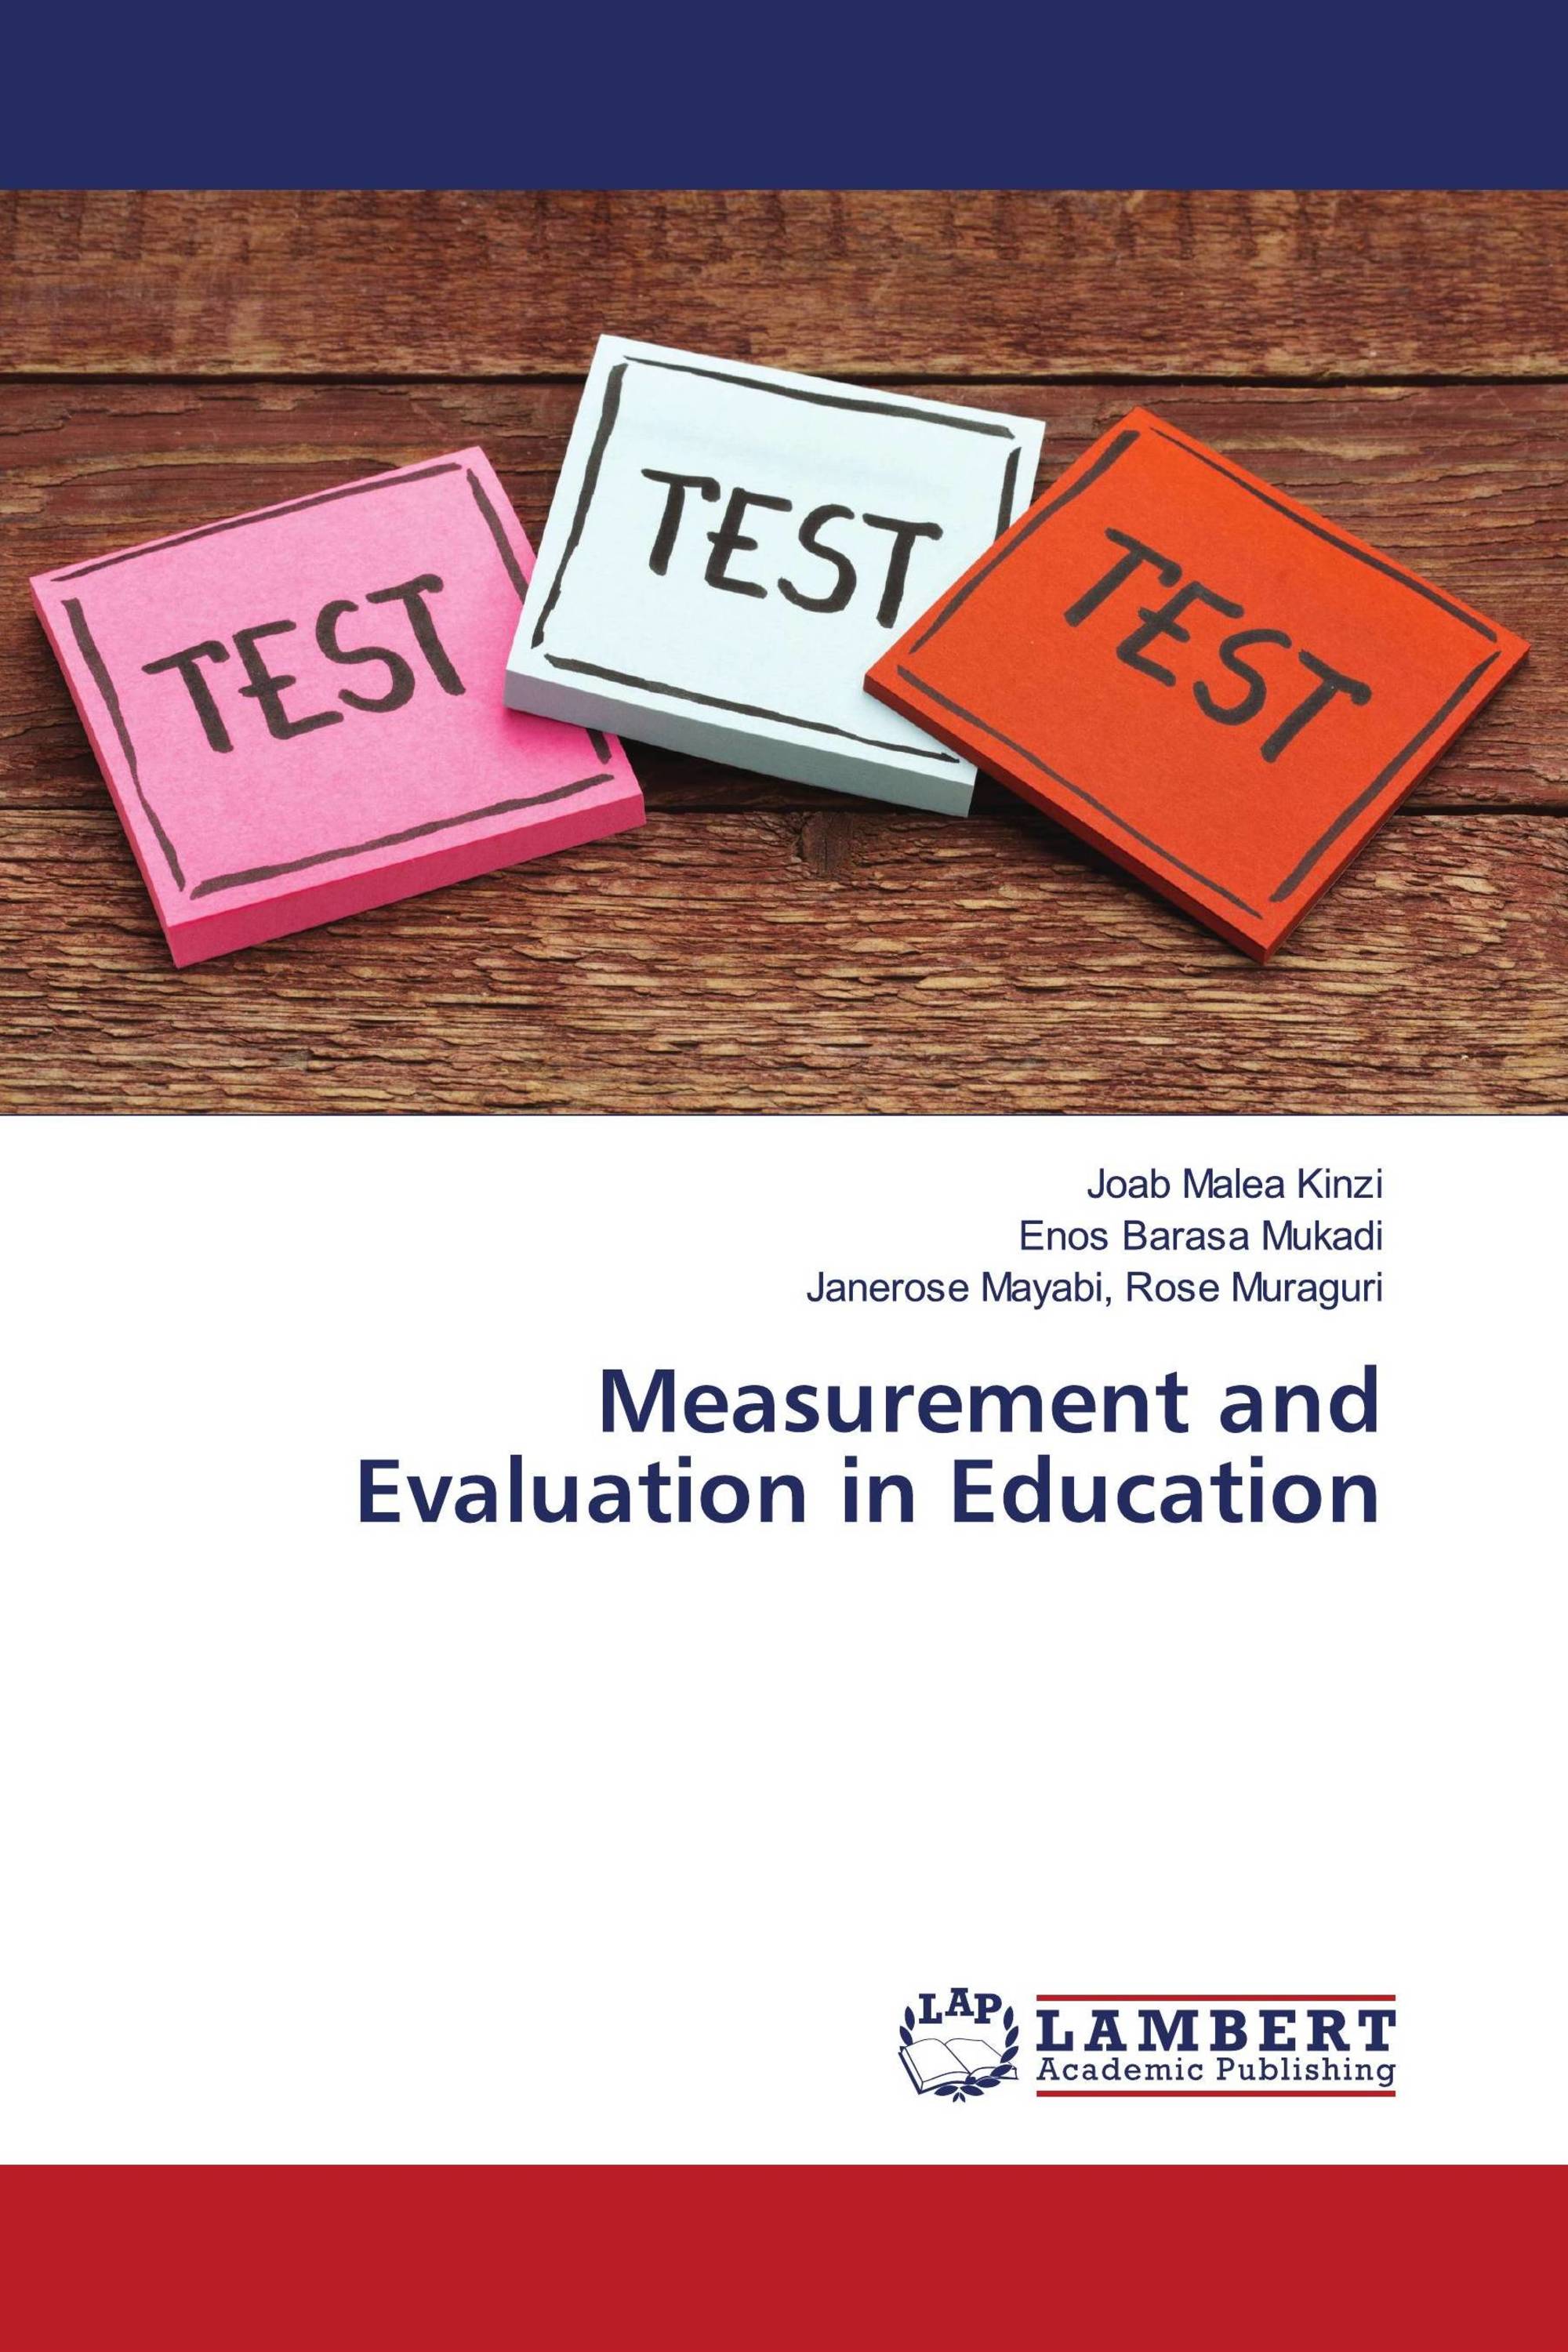 conclusion of measurement and evaluation in education